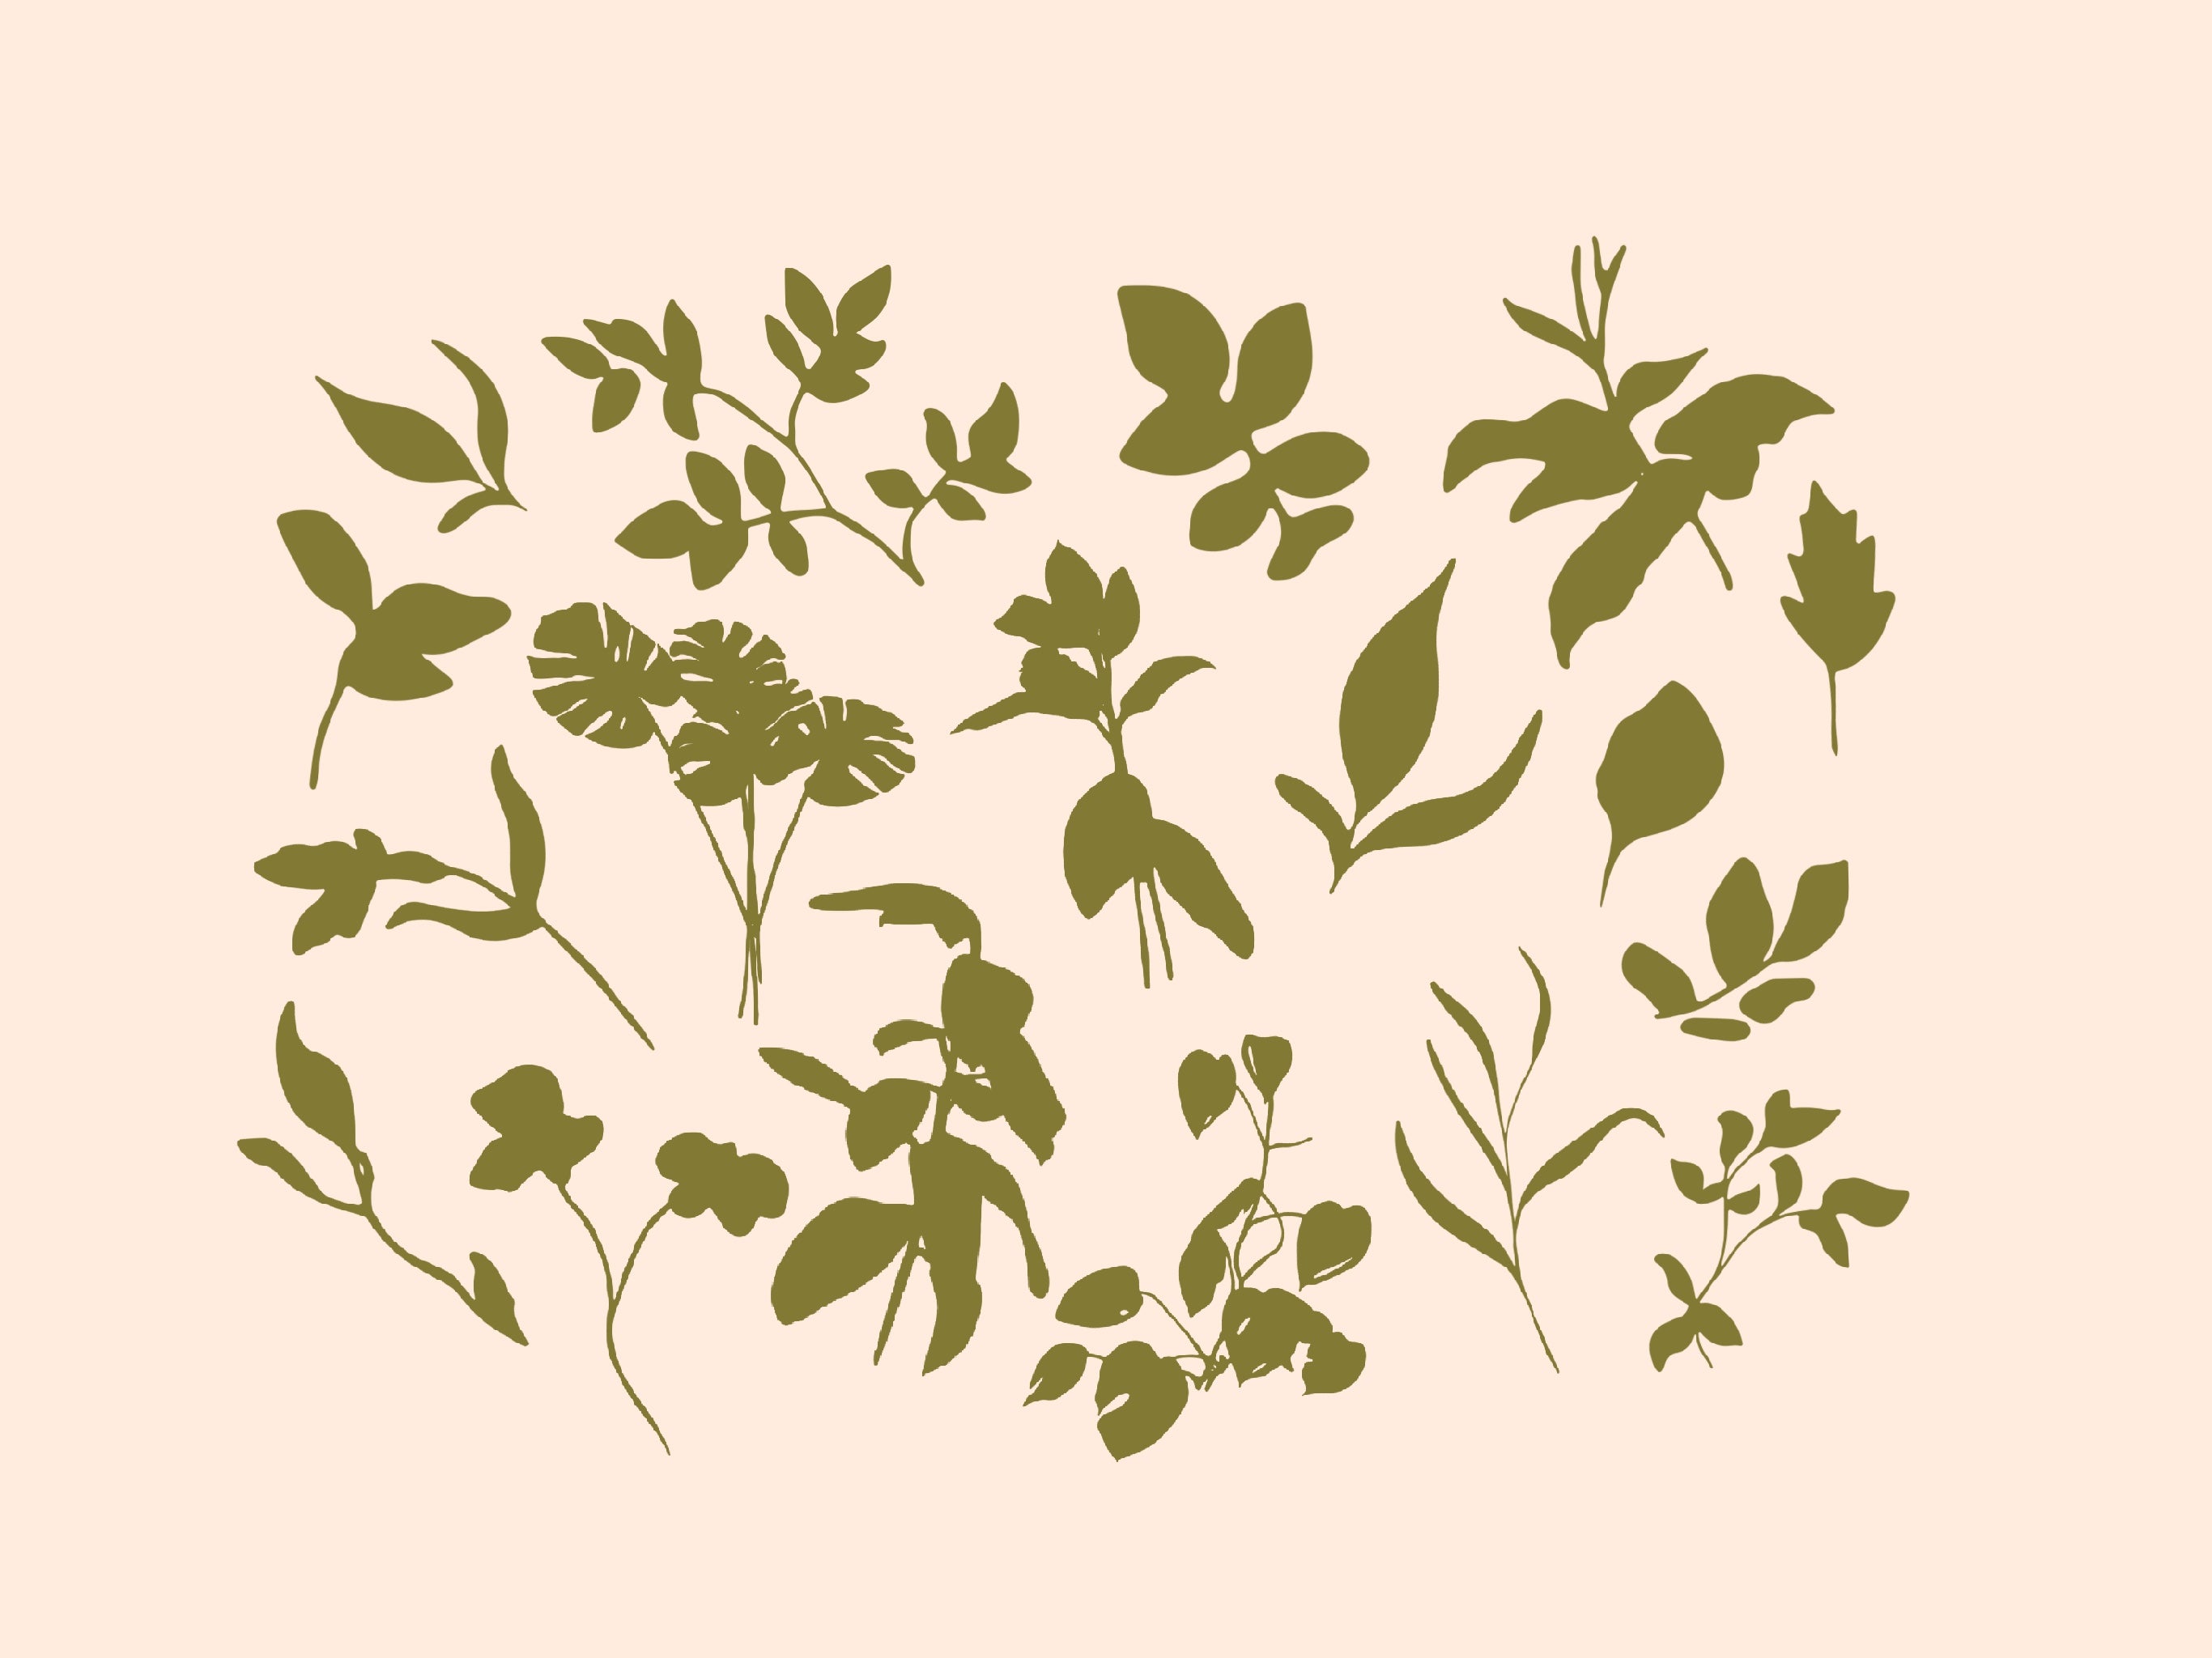 Cutout Floral Stamps for Procreate